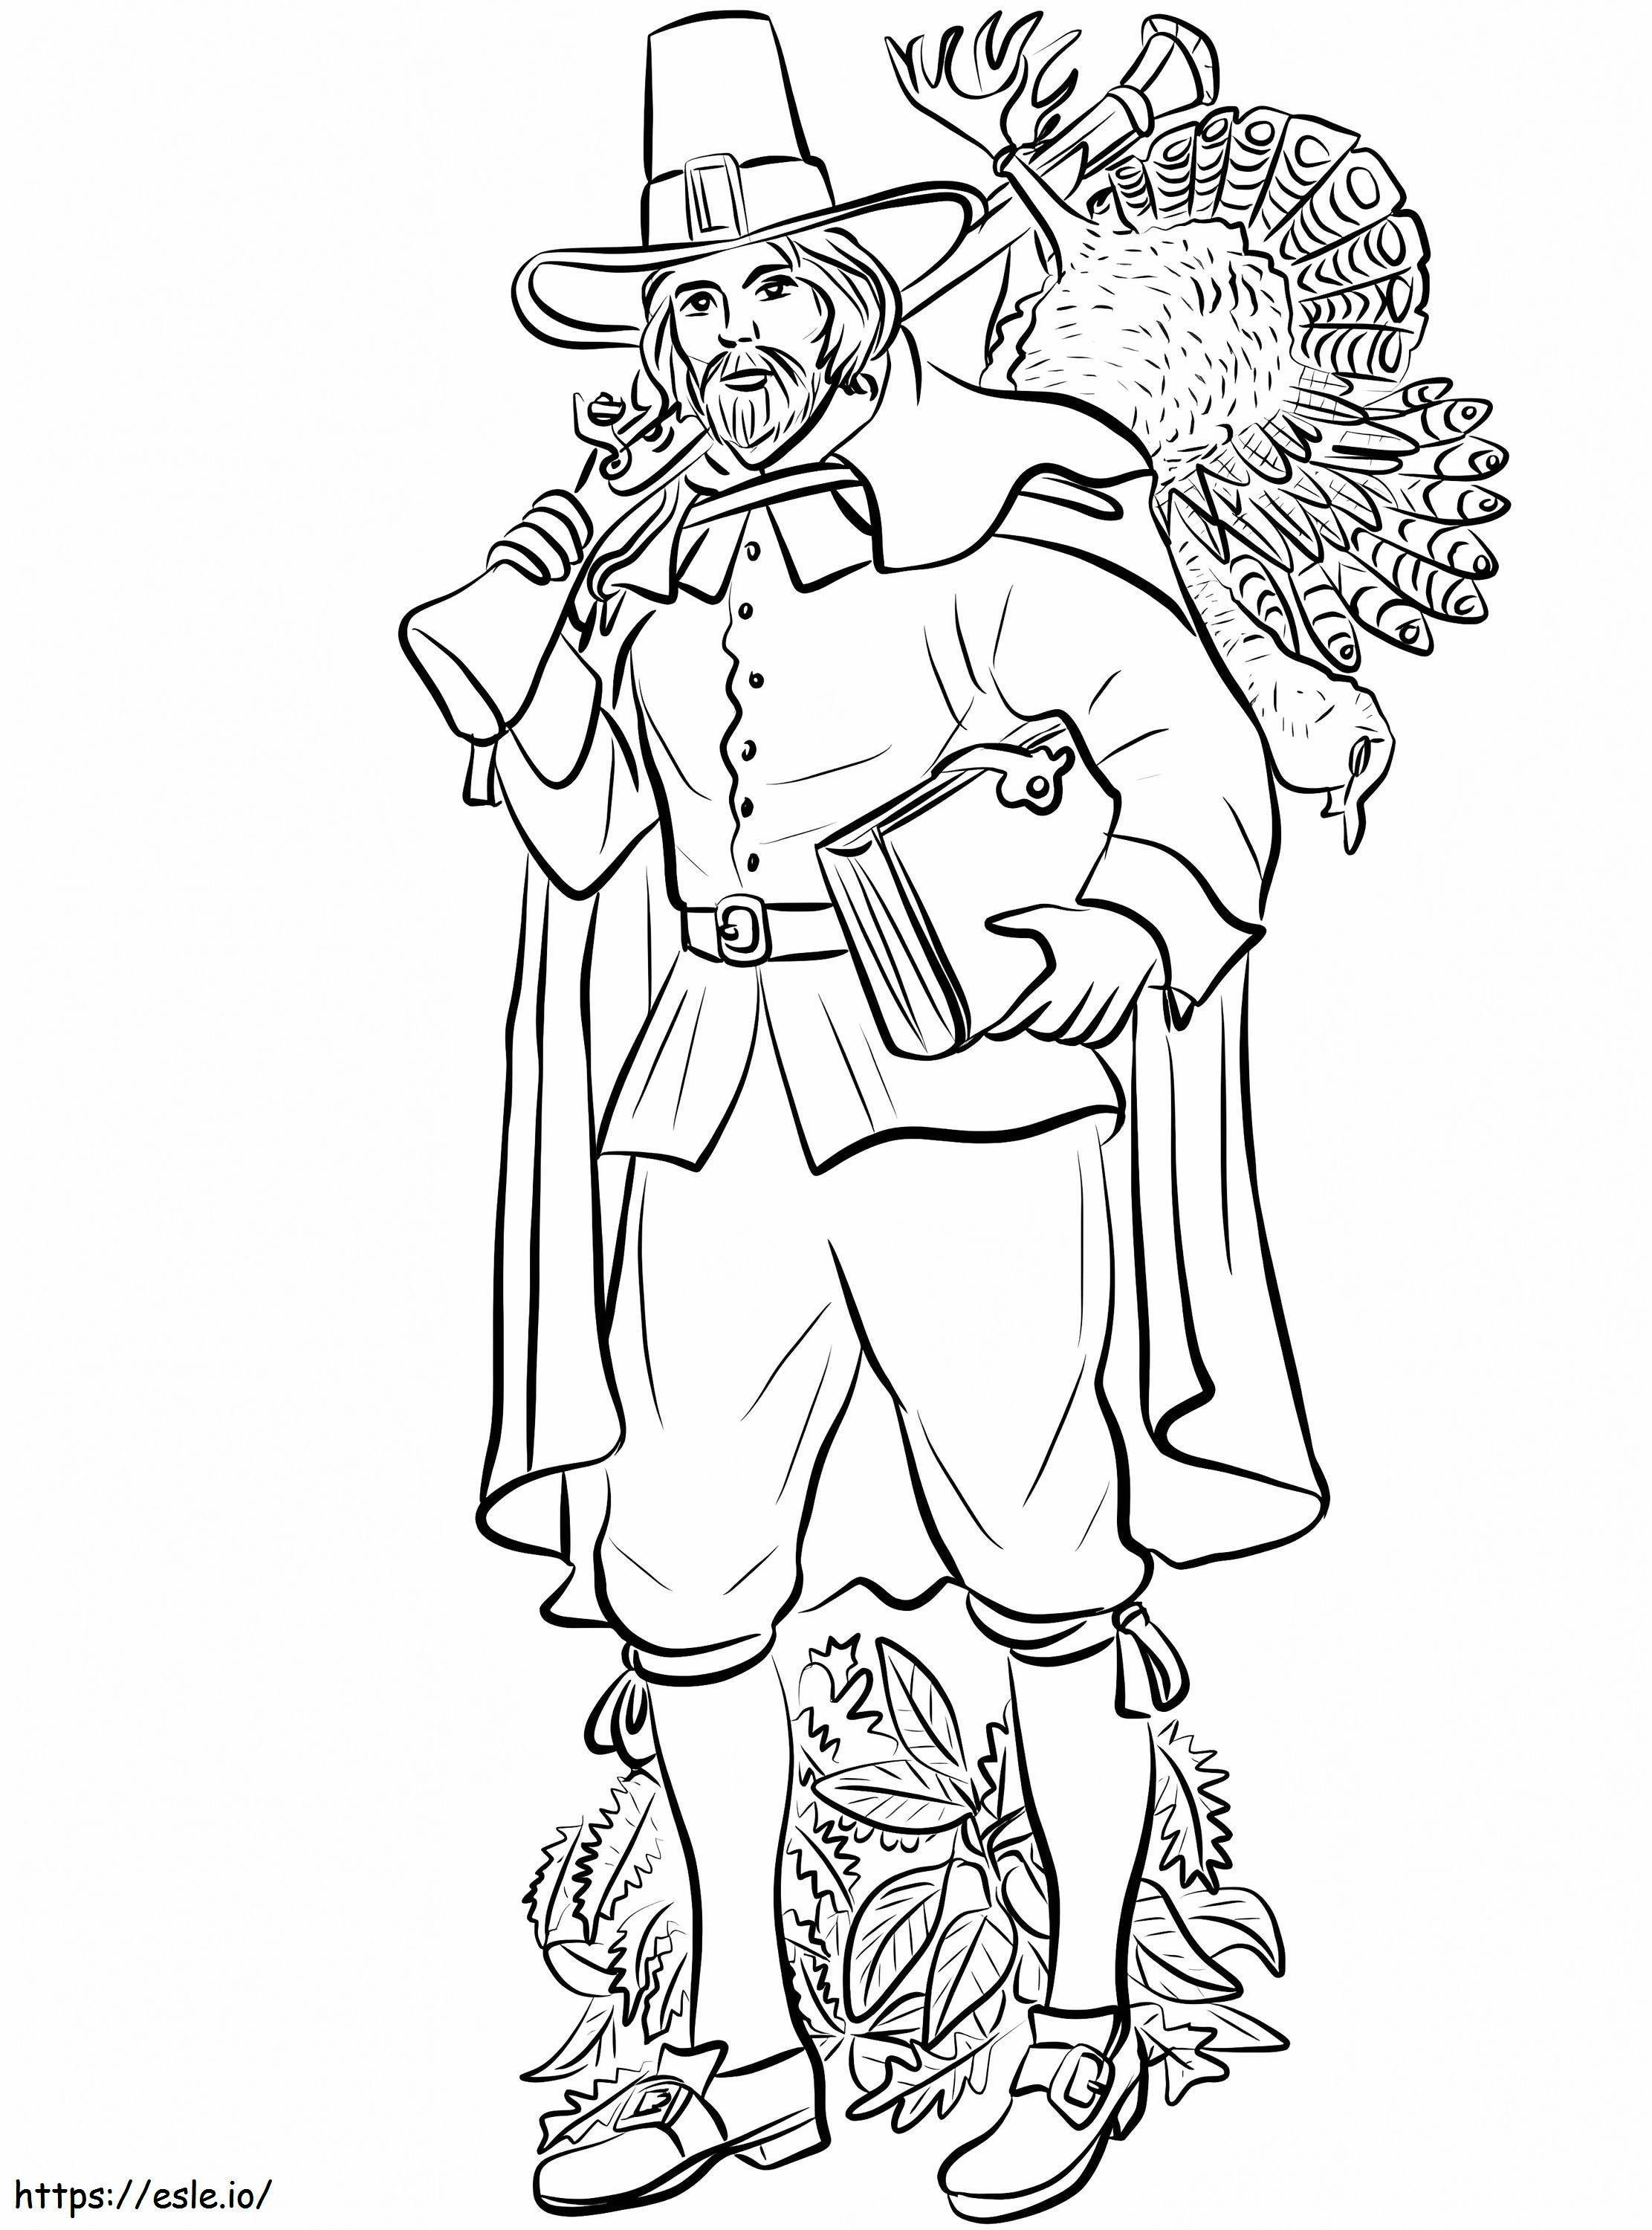 Pilgrim With Turkey coloring page